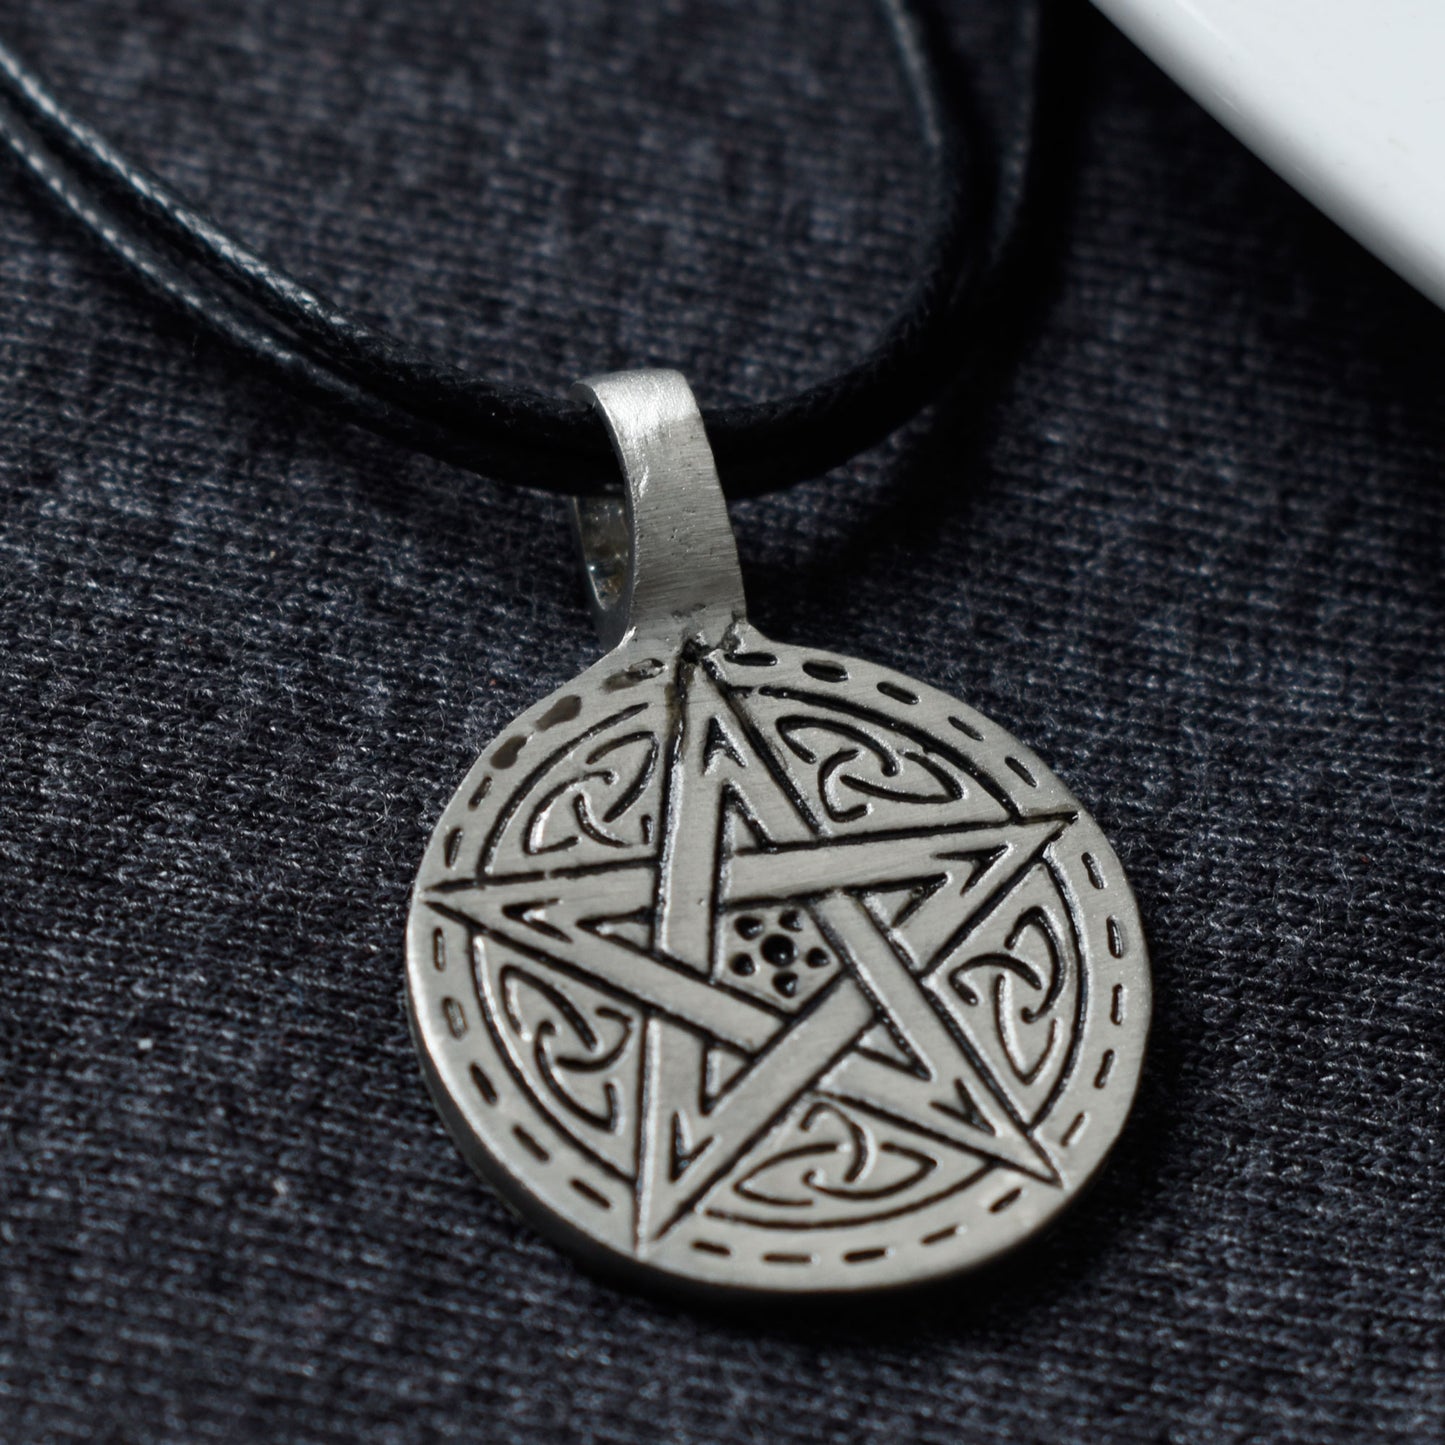 Stunning Pentagram Silver Pewter Charm Necklace Pendant Jewelry